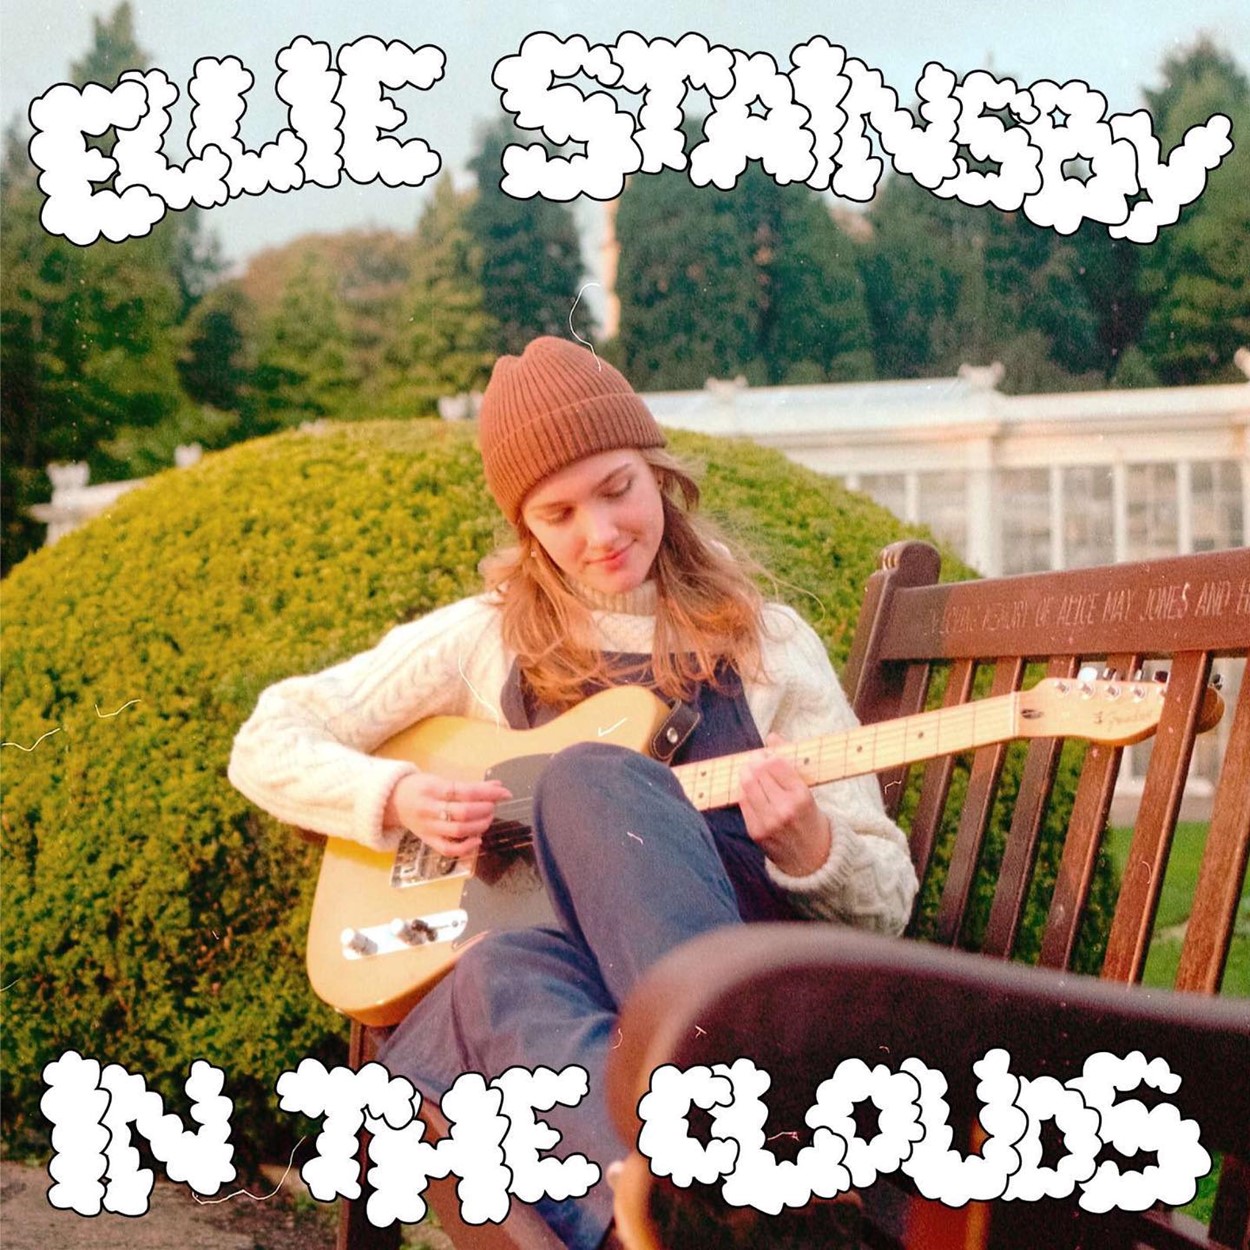 Ellie Stainsby performs at the launch of In The Clouds (at The Chapel, Angel Microbrewery) on 14 April